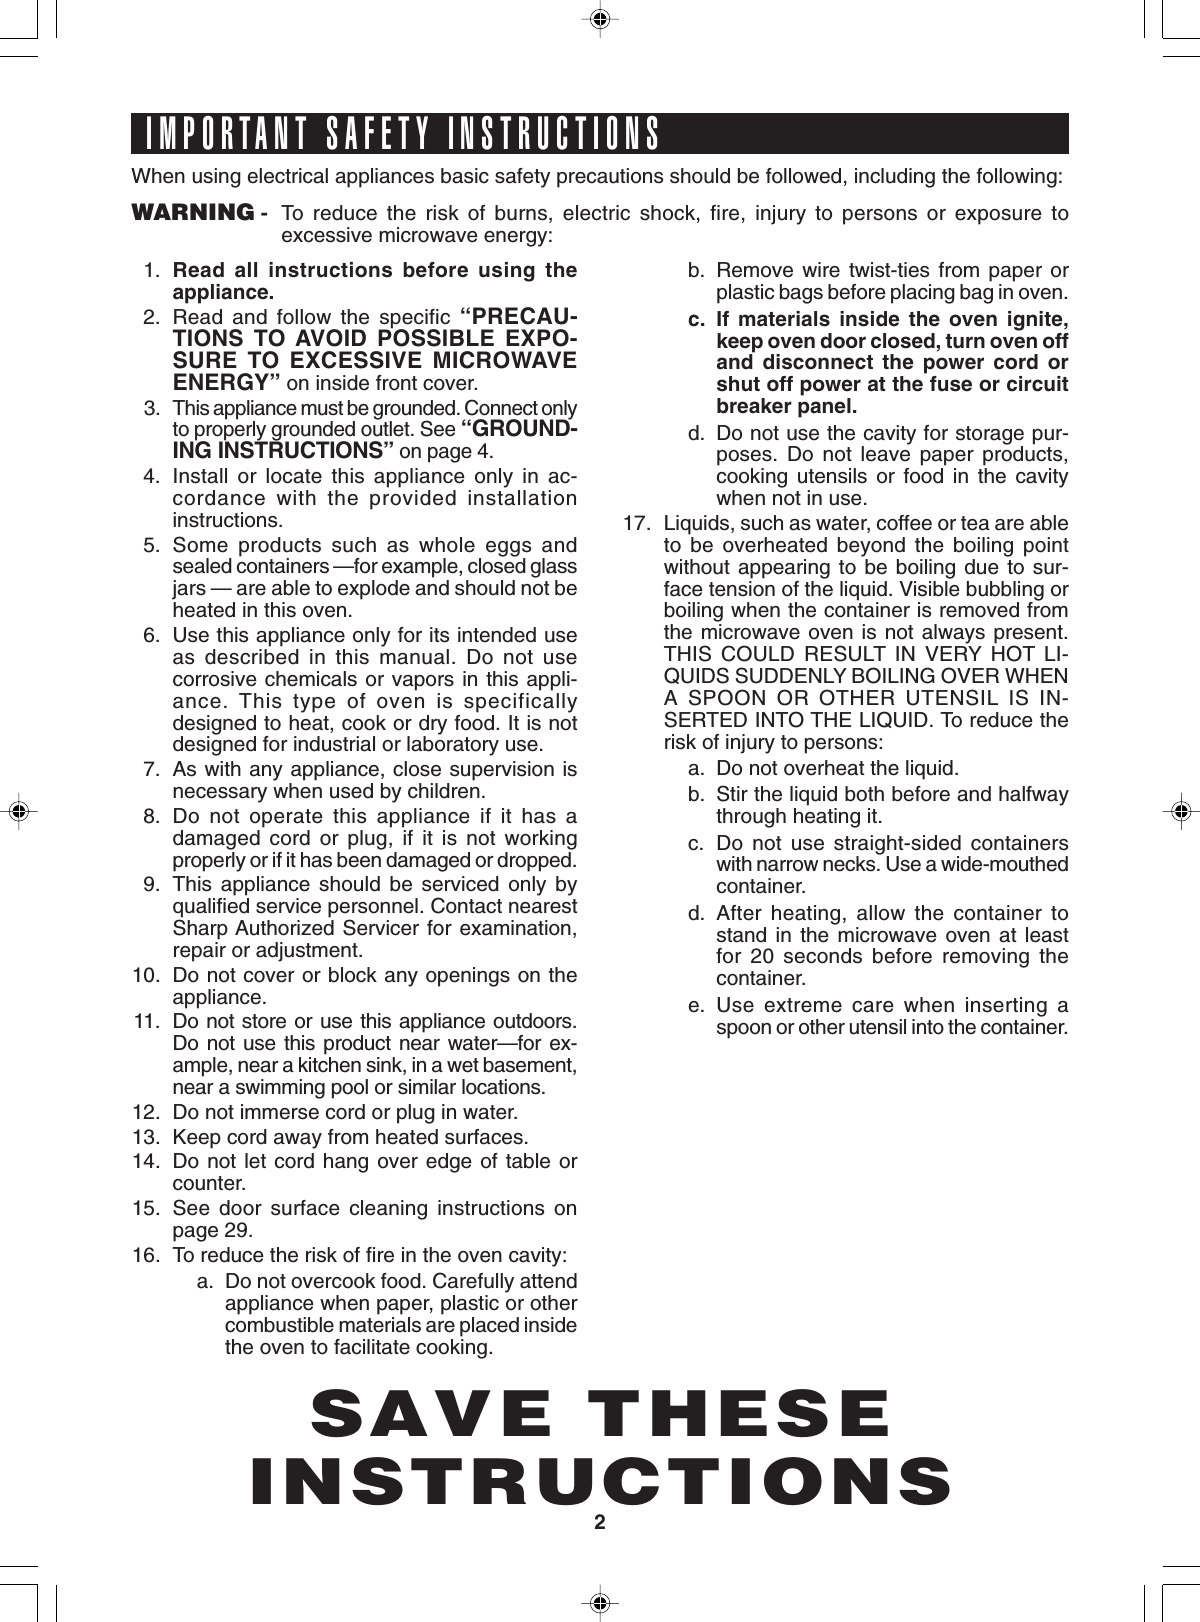 2SAVE THESEINSTRUCTIONSIMPORTANT SAFETY INSTRUCTIONSWhen using electrical appliances basic safety precautions should be followed, including the following:WARNING - To reduce the risk of burns, electric shock, fire, injury to persons or exposure toexcessive microwave energy:1. Read all instructions before using theappliance.2. Read and follow the specific “PRECAU-TIONS TO AVOID POSSIBLE EXPO-SURE TO EXCESSIVE MICROWAVEENERGY” on inside front cover.3.This appliance must be grounded. Connect onlyto properly grounded outlet. See “GROUND-ING INSTRUCTIONS” on page 4.4. Install or locate this appliance only in ac-cordance with the provided installationinstructions.5. Some products such as whole eggs andsealed containers —for example, closed glassjars — are able to explode and should not beheated in this oven.6. Use this appliance only for its intended useas described in this manual. Do not usecorrosive chemicals or vapors in this appli-ance. This type of oven is specificallydesigned to heat, cook or dry food. It is notdesigned for industrial or laboratory use.7. As with any appliance, close supervision isnecessary when used by children.8. Do not operate this appliance if it has adamaged cord or plug, if it is not workingproperly or if it has been damaged or dropped.9. This appliance should be serviced only byqualified service personnel. Contact nearestSharp Authorized Servicer for examination,repair or adjustment.10. Do not cover or block any openings on theappliance.11. Do not store or use this appliance outdoors.Do not use this product near water—for ex-ample, near a kitchen sink, in a wet basement,near a swimming pool or similar locations.12. Do not immerse cord or plug in water.13. Keep cord away from heated surfaces.14. Do not let cord hang over edge of table orcounter.15. See door surface cleaning instructions onpage 29.16. To reduce the risk of fire in the oven cavity:a. Do not overcook food. Carefully attendappliance when paper, plastic or othercombustible materials are placed insidethe oven to facilitate cooking.b. Remove wire twist-ties from paper orplastic bags before placing bag in oven.c. If materials inside the oven ignite,keep oven door closed, turn oven offand disconnect the power cord orshut off power at the fuse or circuitbreaker panel.d. Do not use the cavity for storage pur-poses. Do not leave paper products,cooking utensils or food in the cavitywhen not in use.17. Liquids, such as water, coffee or tea are ableto be overheated beyond the boiling pointwithout appearing to be boiling due to sur-face tension of the liquid. Visible bubbling orboiling when the container is removed fromthe microwave oven is not always present.THIS COULD RESULT IN VERY HOT LI-QUIDS SUDDENLY BOILING OVER WHENA SPOON OR OTHER UTENSIL IS IN-SERTED INTO THE LIQUID. To reduce therisk of injury to persons:a. Do not overheat the liquid.b. Stir the liquid both before and halfwaythrough heating it.c. Do not use straight-sided containerswith narrow necks. Use a wide-mouthedcontainer.d. After heating, allow the container tostand in the microwave oven at leastfor 20 seconds before removing thecontainer.e. Use extreme care when inserting aspoon or other utensil into the container.